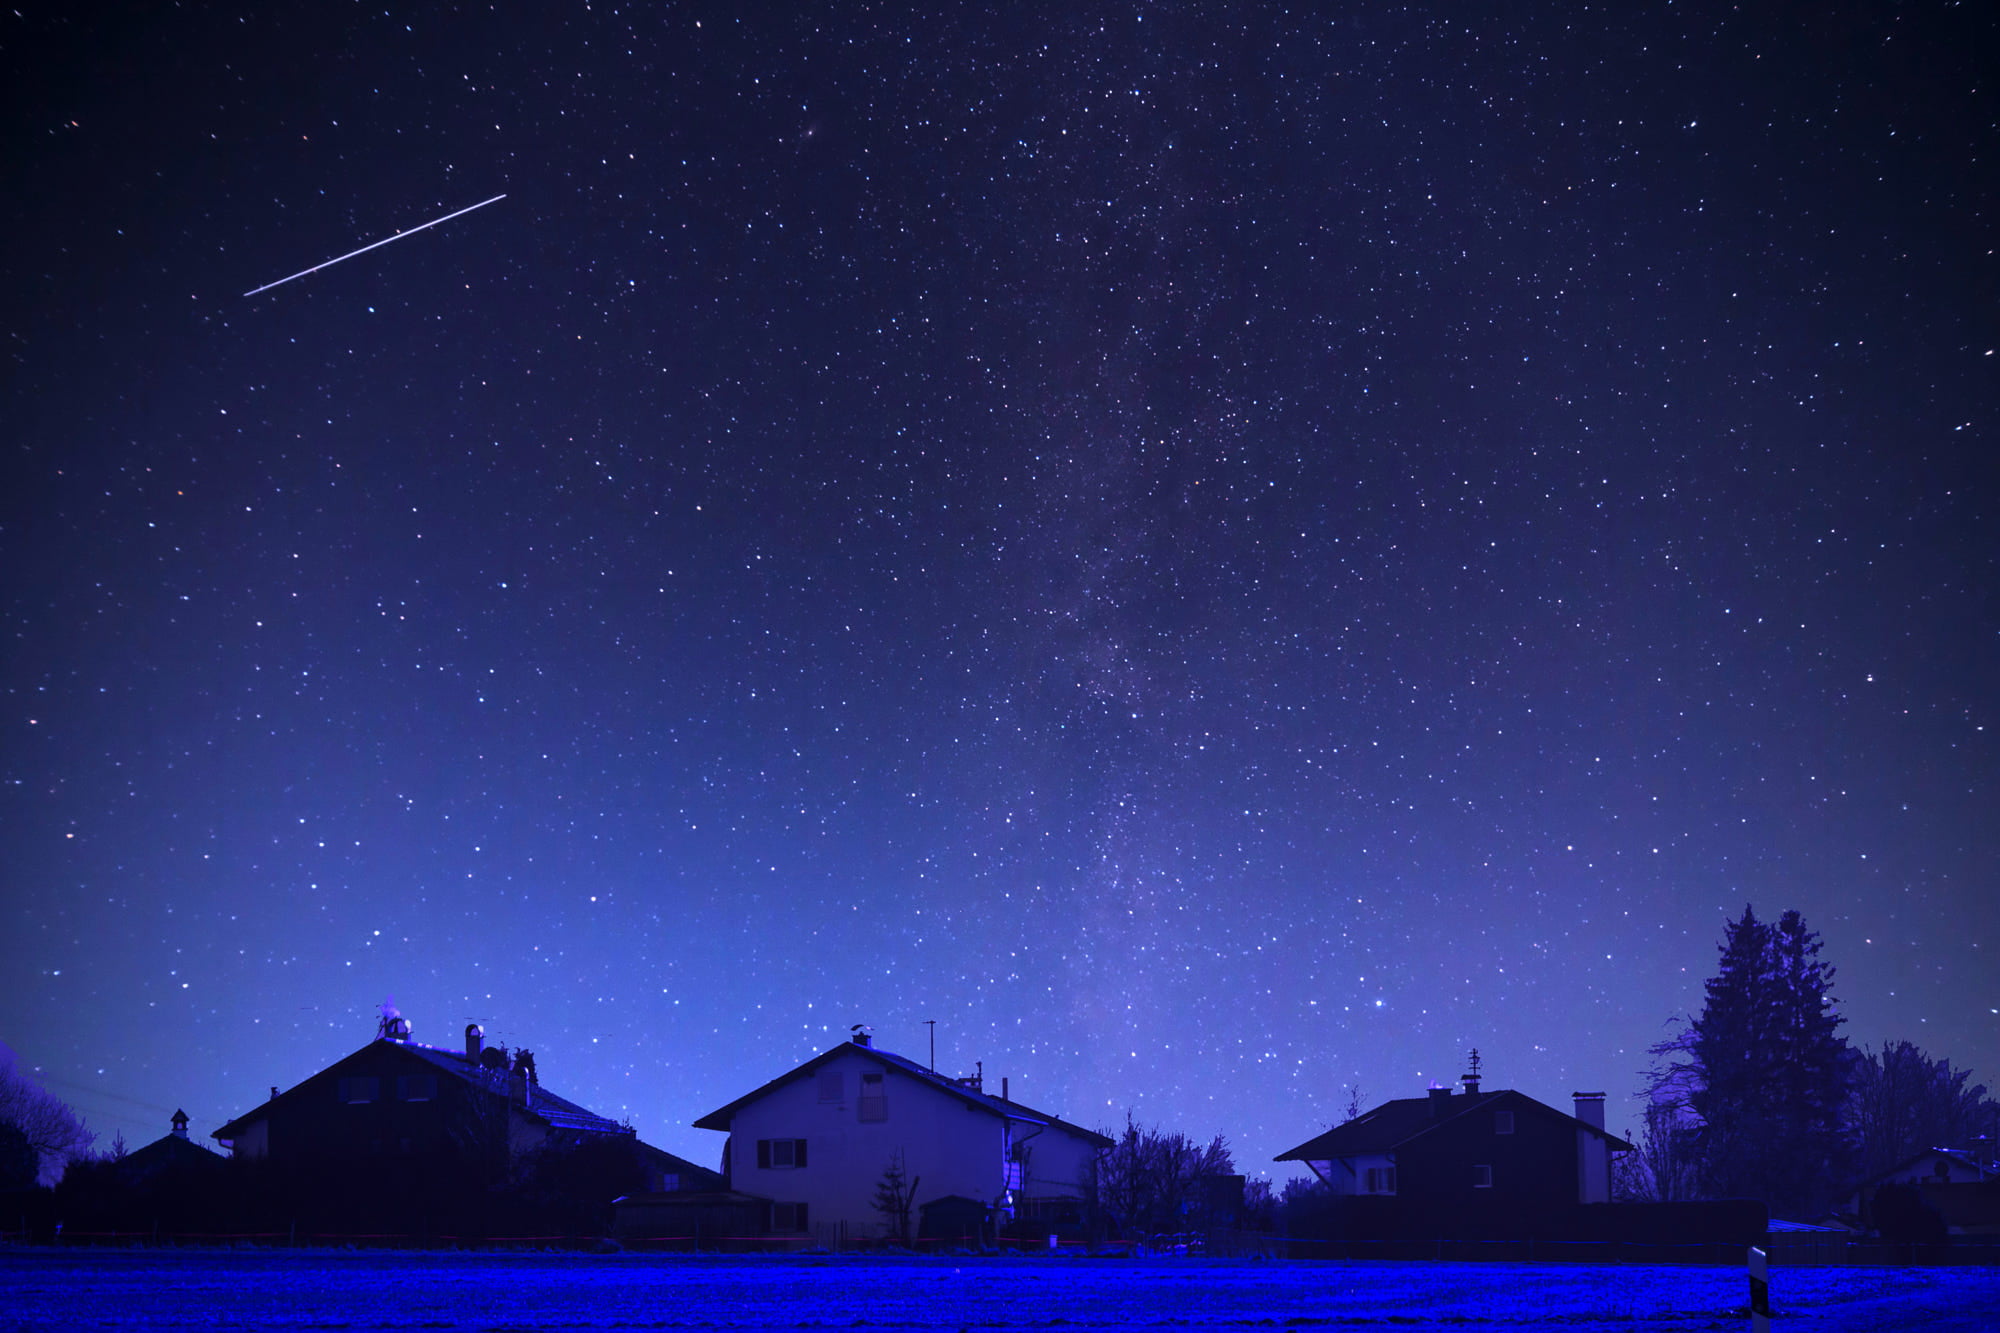 house under starry sky with shooting star, photography, landscape, sky, house